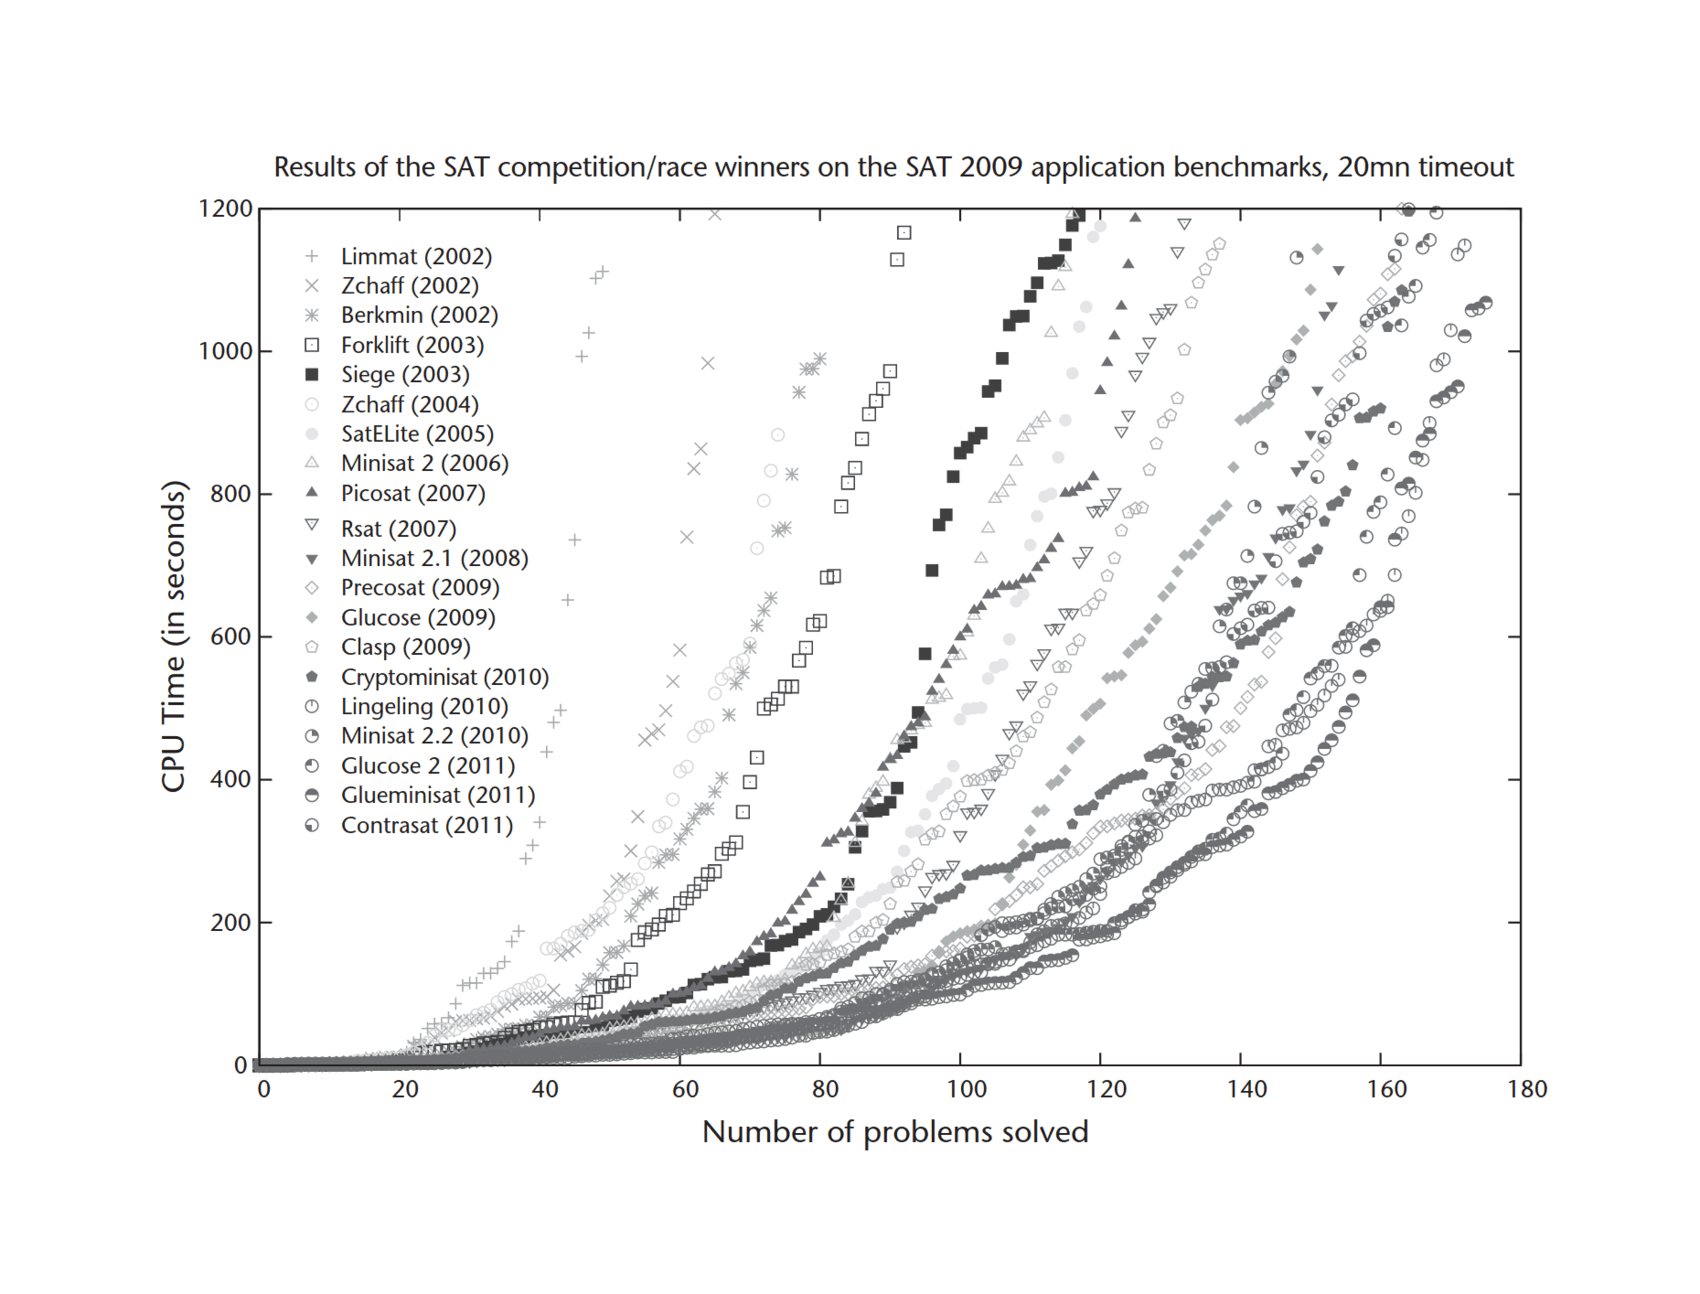 Figure 2: Performance Evolution of the Best SAT Solvers from 2002 to 2011. The farther to the right the data points are, the better the solver.